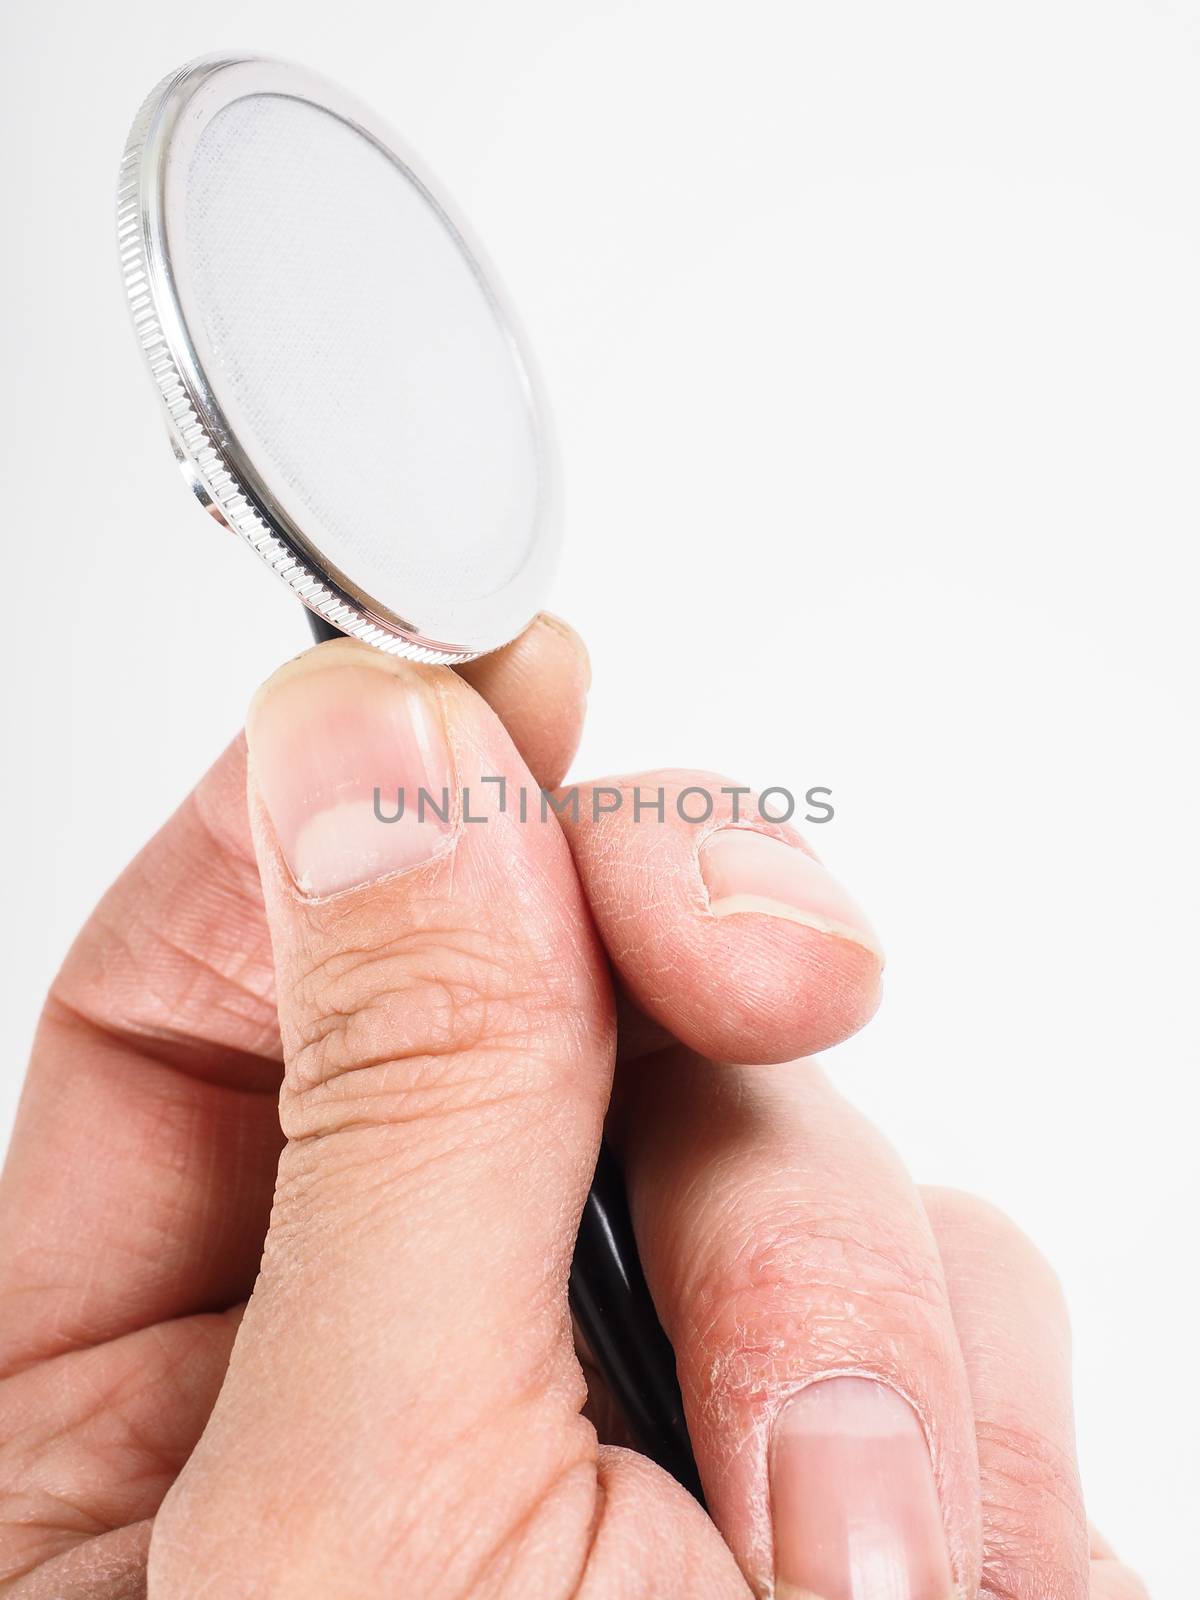 Closeup of hand holding a stethoscope towards bright background by Arvebettum